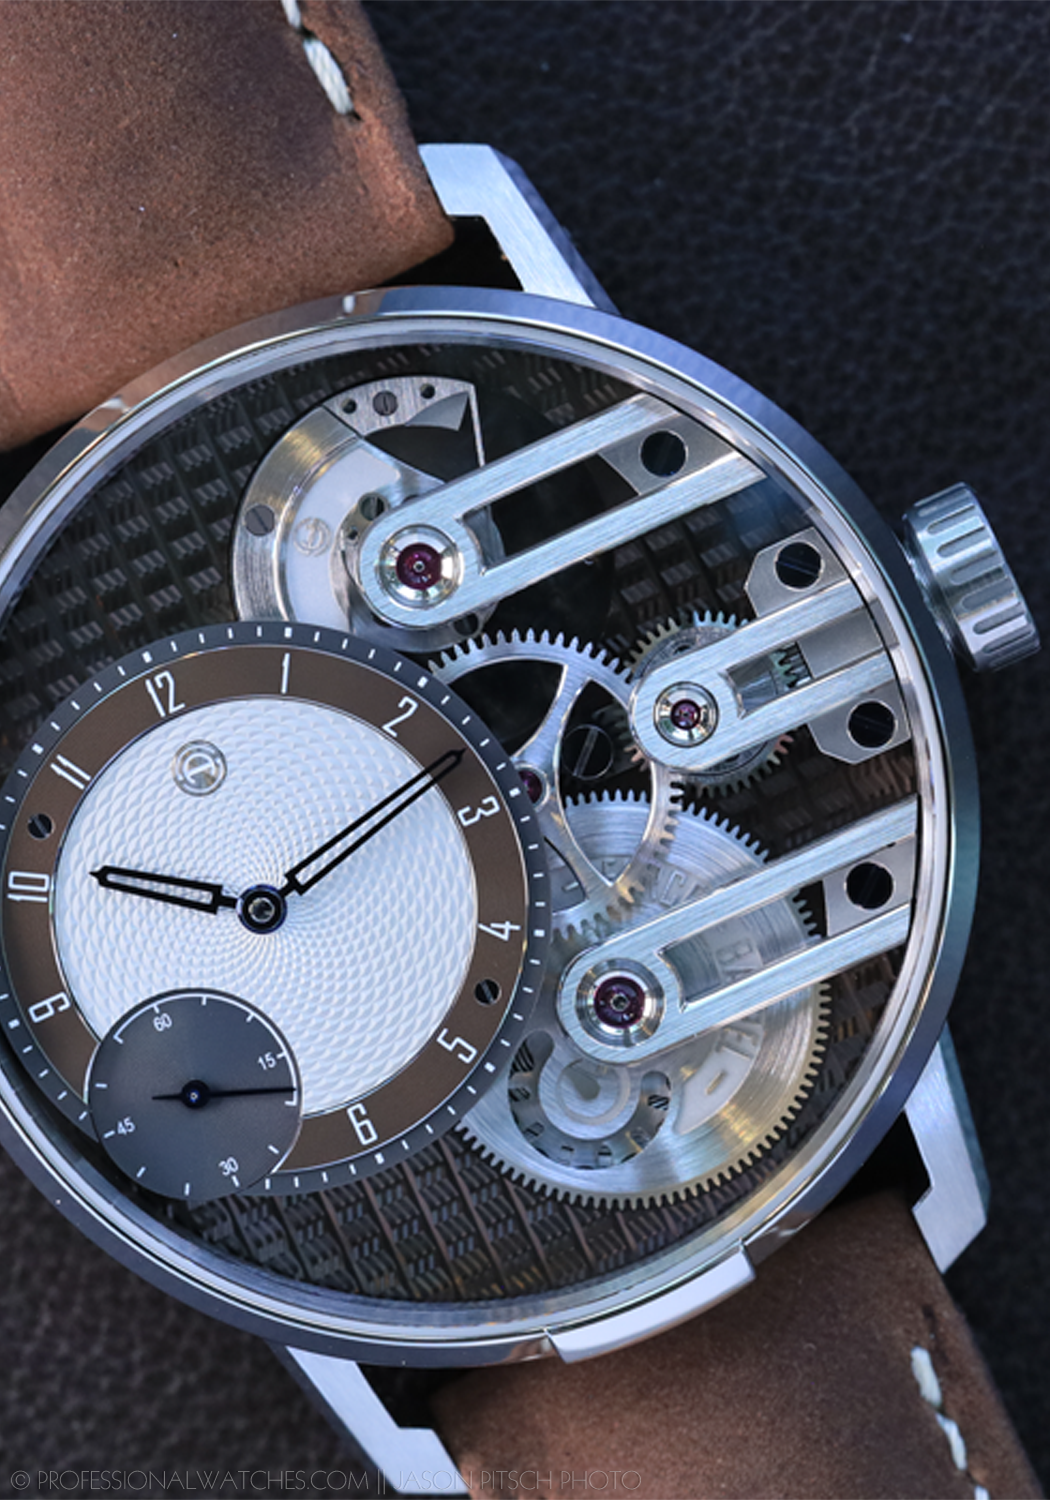 Armin Strom Gravity Equal Force 18KRG Oster Edition | Photo by Jason Pitsch (ProfessionalWatches.com)